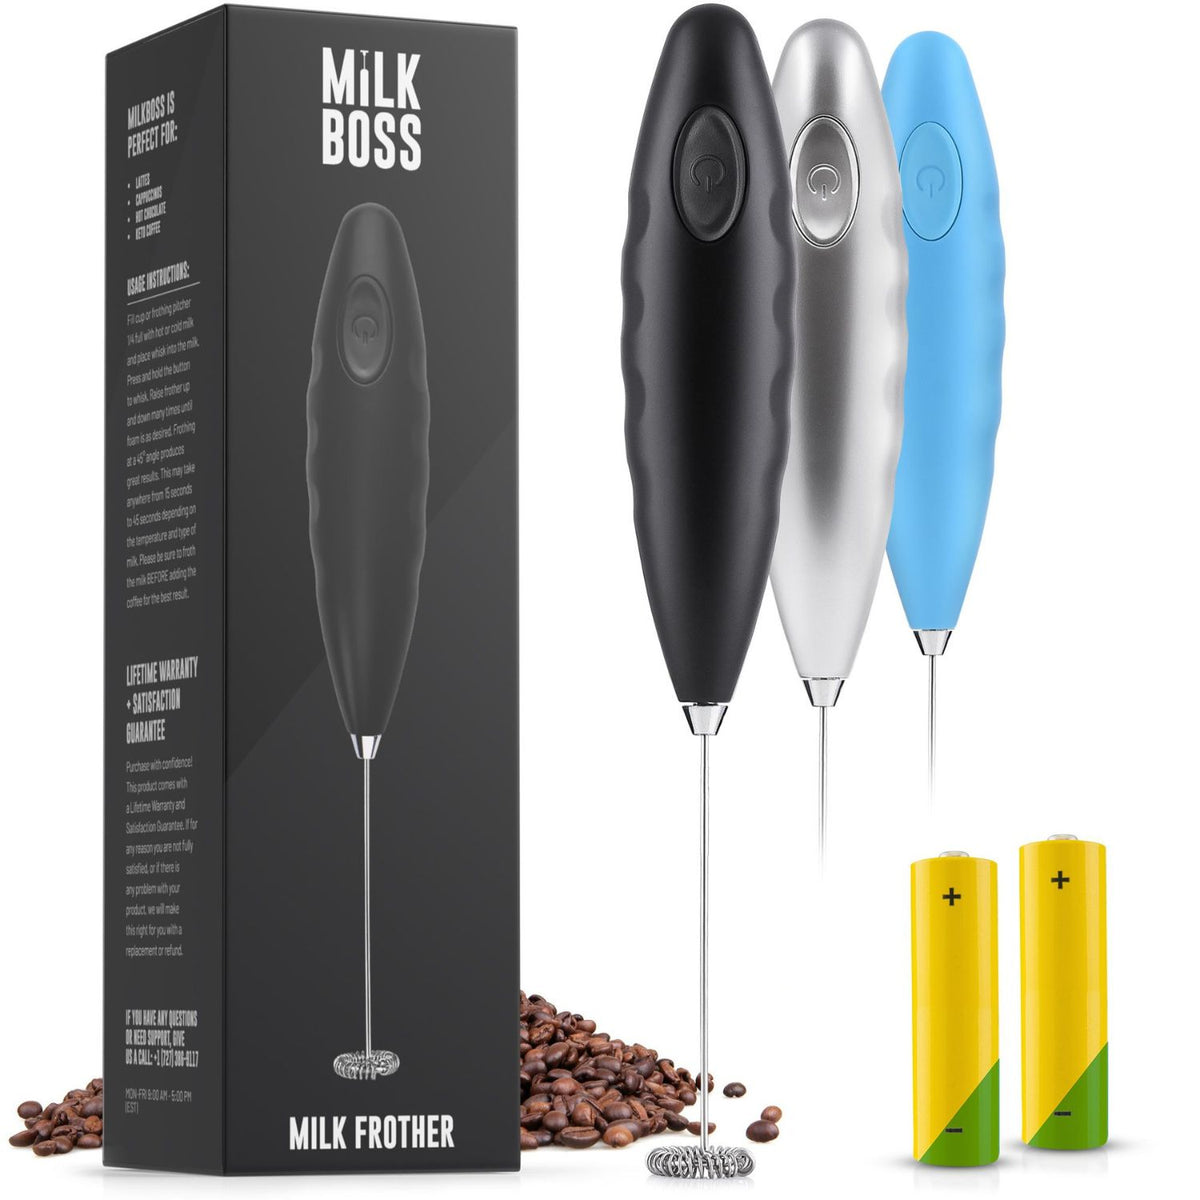  Milk Boss Powerful Milk Frother Handheld With Upgraded